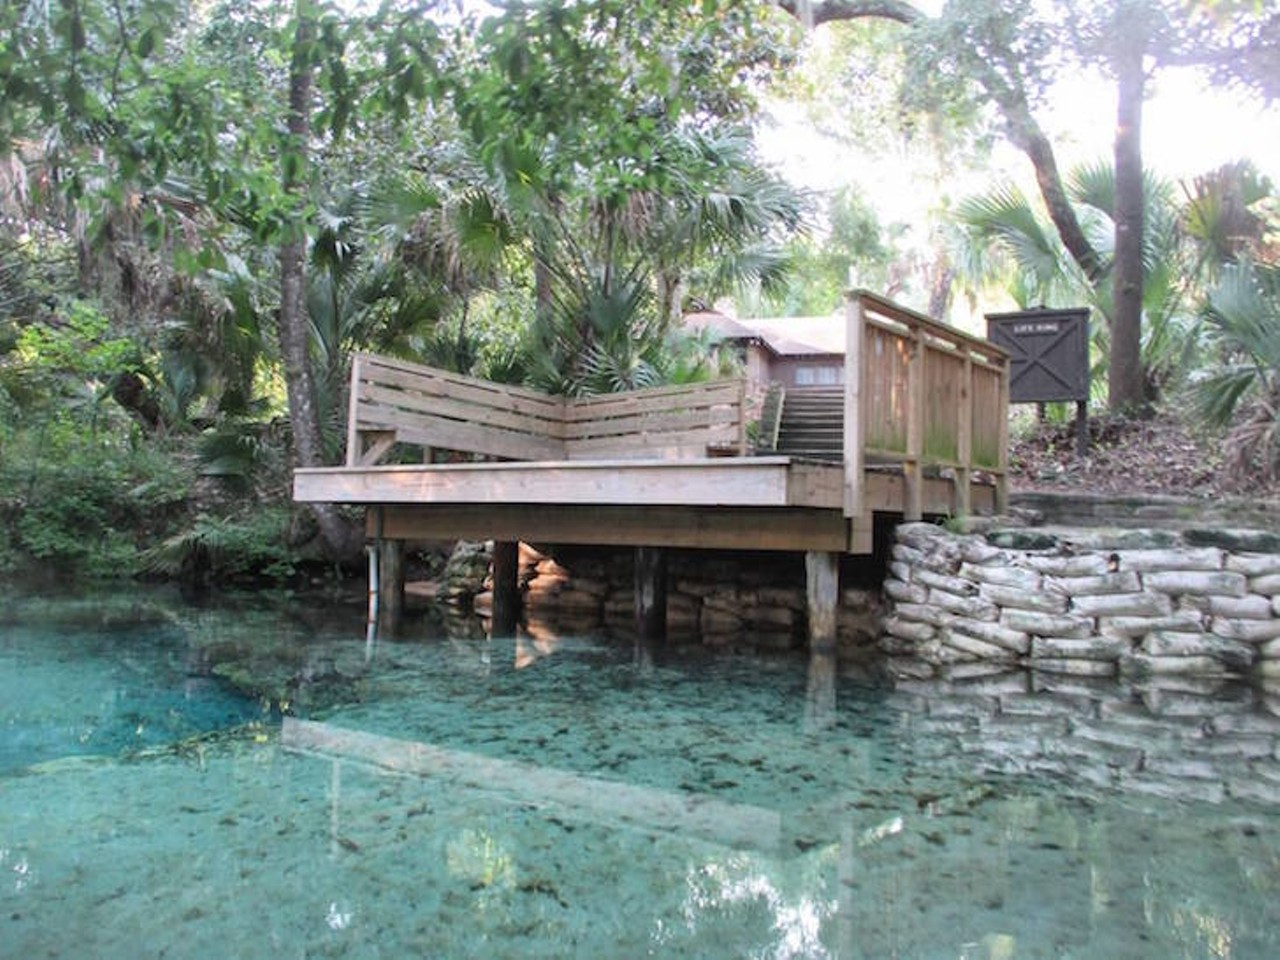 Dip in the sparkling water at Juniper Springs
Estimated driving distance from Orlando: 1 hour 20 minutes 
One of the oldest and most popular recreational spots in Florida, Juniper Springs, located in the Ocala National Forest, is known for its sparkling waters, campground, and scenic hiking trails. There are hundreds of tiny springs and paths to explore, and the park is shaded by great oak and palm trees. This is a great spot to spend the day outdoors. 
Photo via Juniper Springs Recreation Area /Facebook